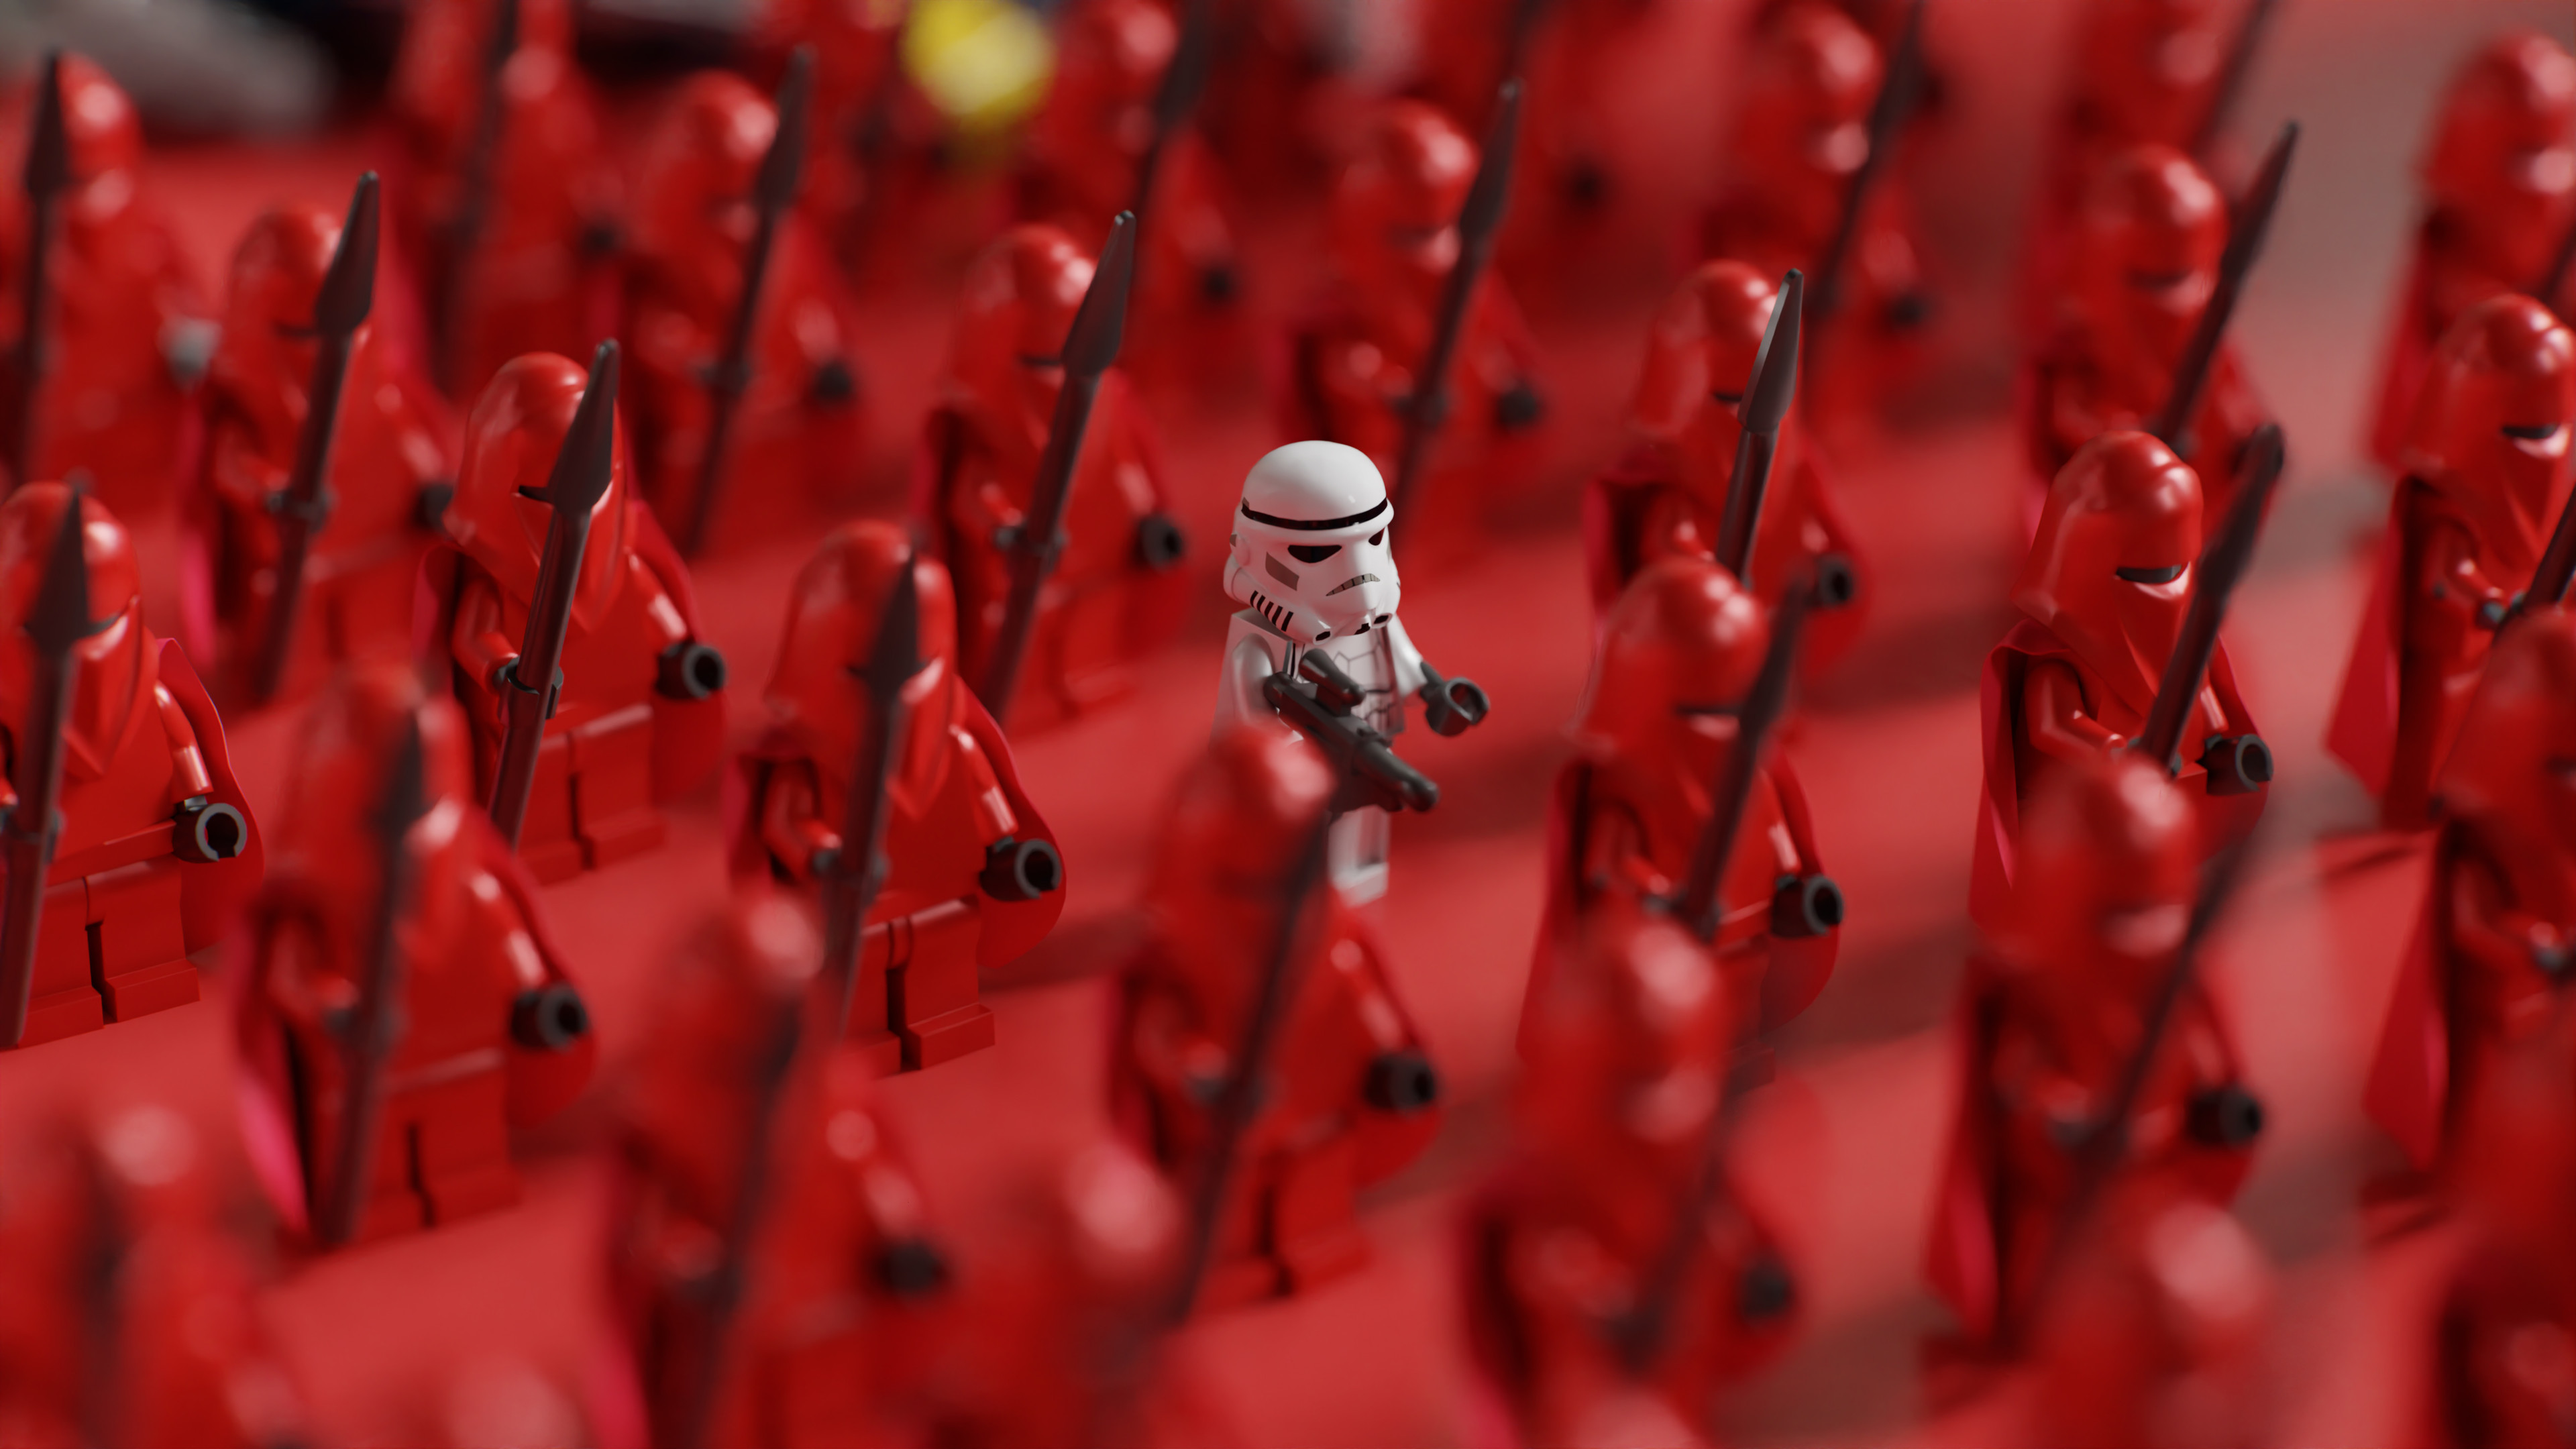 General 3840x2160 LEGO Star Wars stormtrooper Red Guardian tilt shift macro LEGO Star Wars movie characters toys